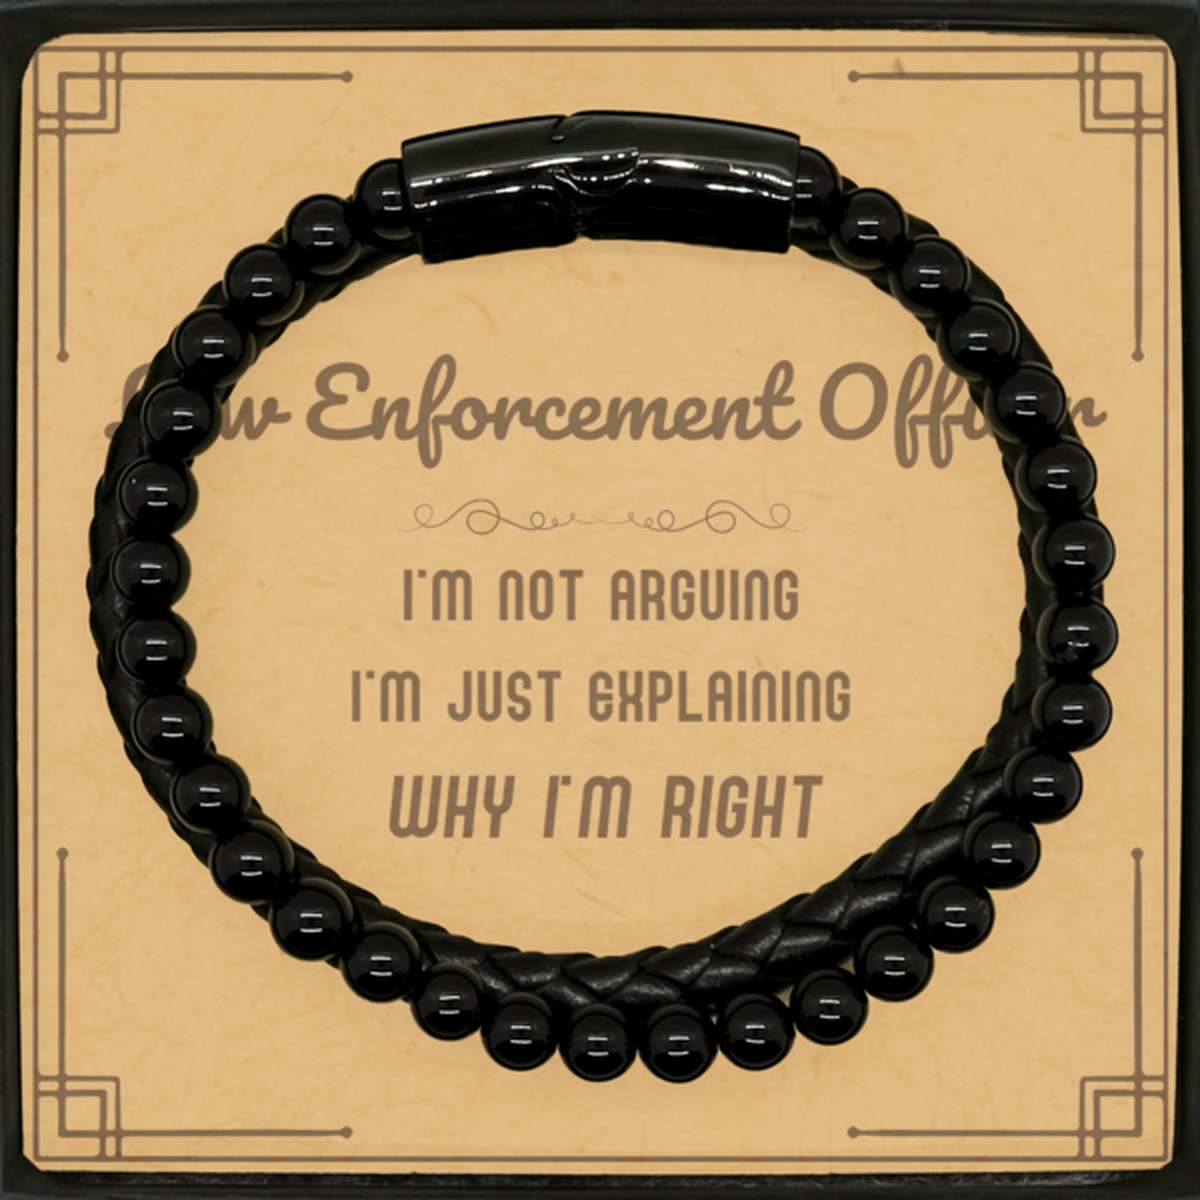 Law Enforcement Officer I'm not Arguing. I'm Just Explaining Why I'm RIGHT Stone Leather Bracelets, Funny Saying Quote Law Enforcement Officer Gifts For Law Enforcement Officer Message Card Graduation Birthday Christmas Gifts for Men Women Coworker